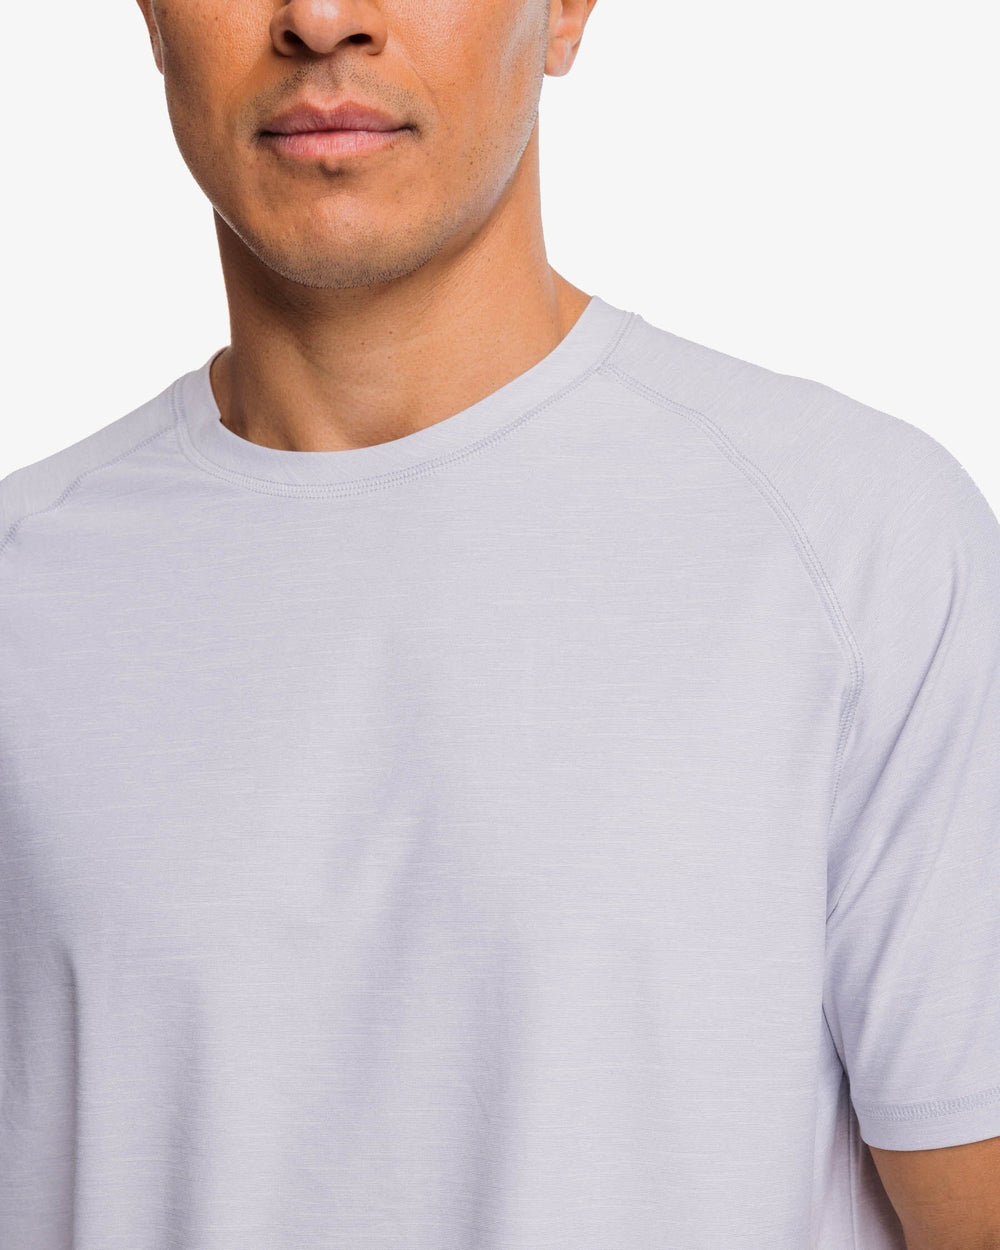 The detail view of the Southern Tide brrr°®-illiant Performance Tee by Southern Tide - Platinum Grey